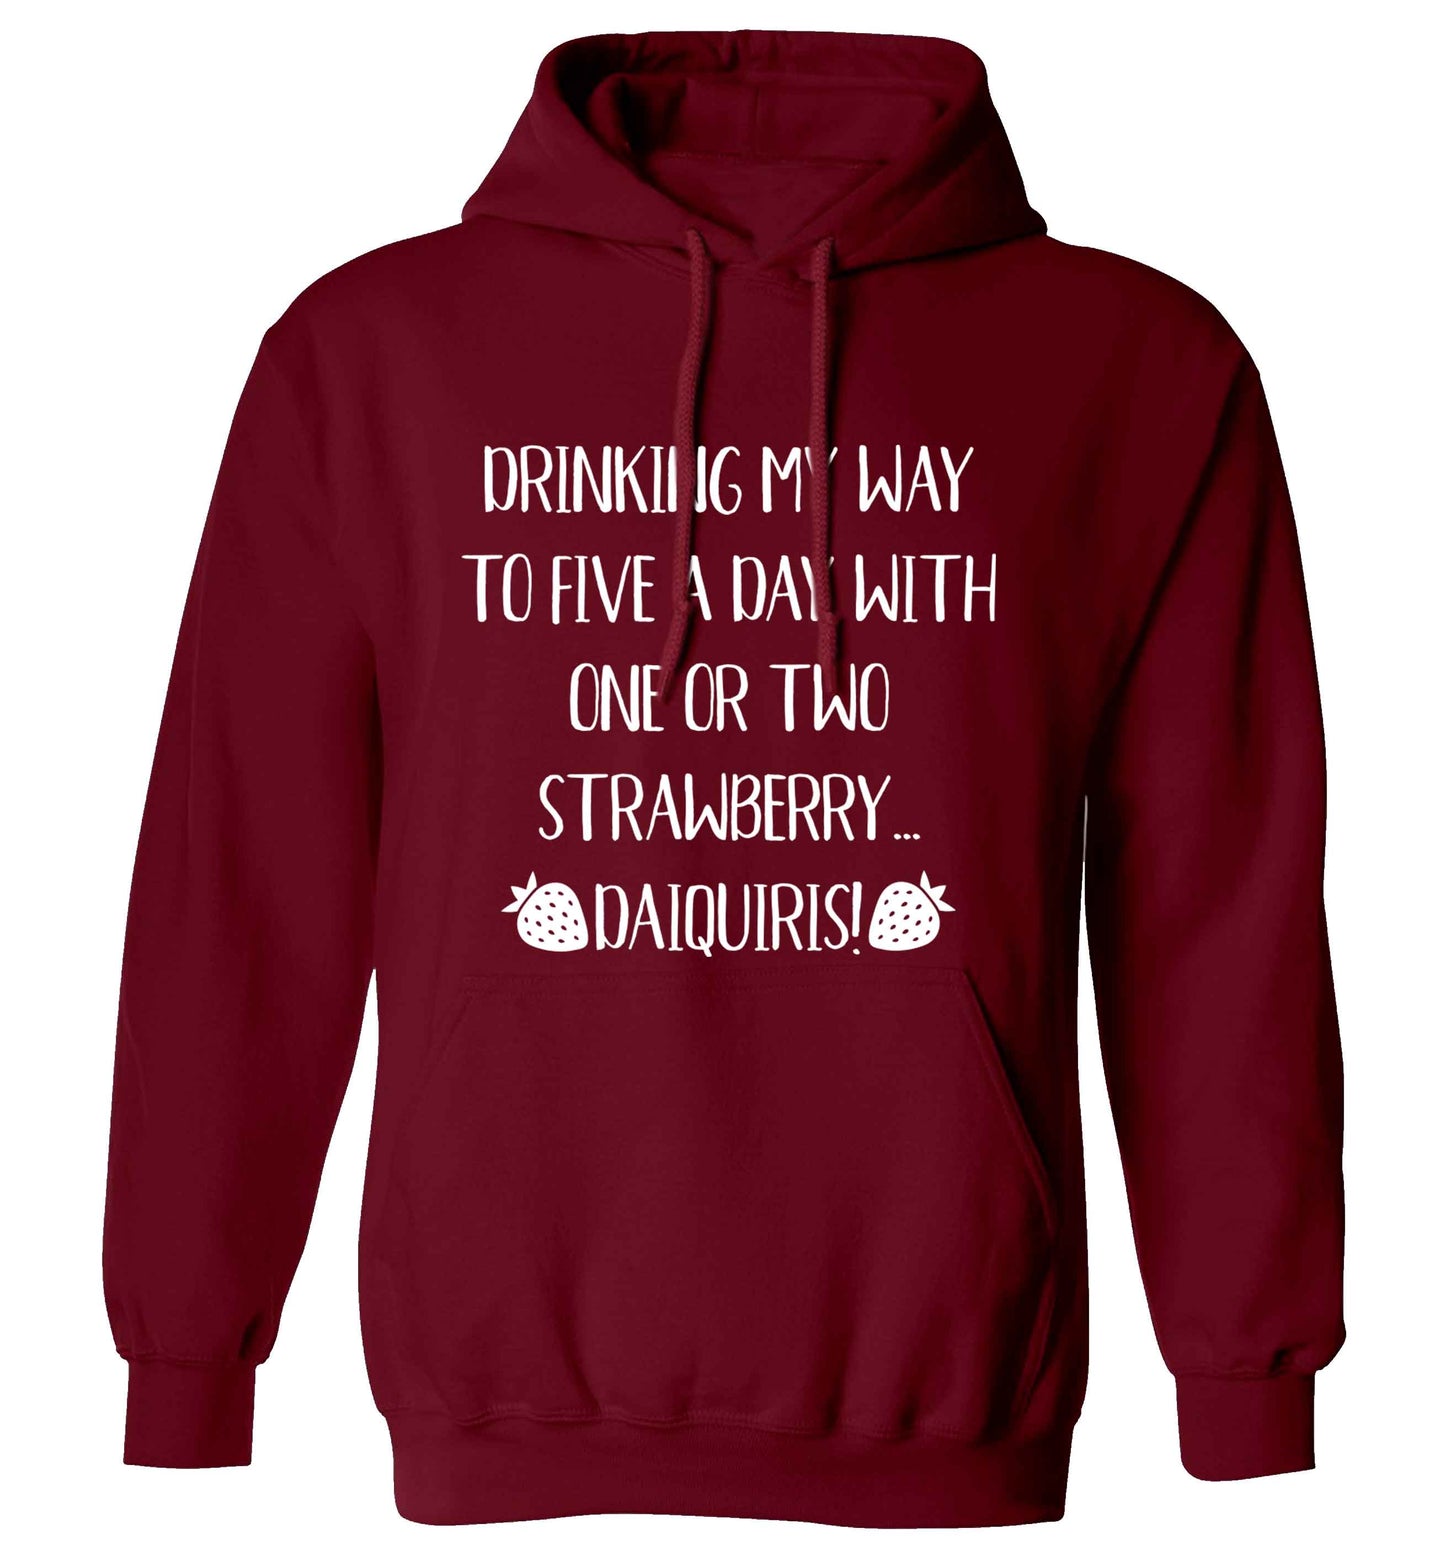 Drinking my way to five a day with one or two straberry daiquiris adults unisex maroon hoodie 2XL